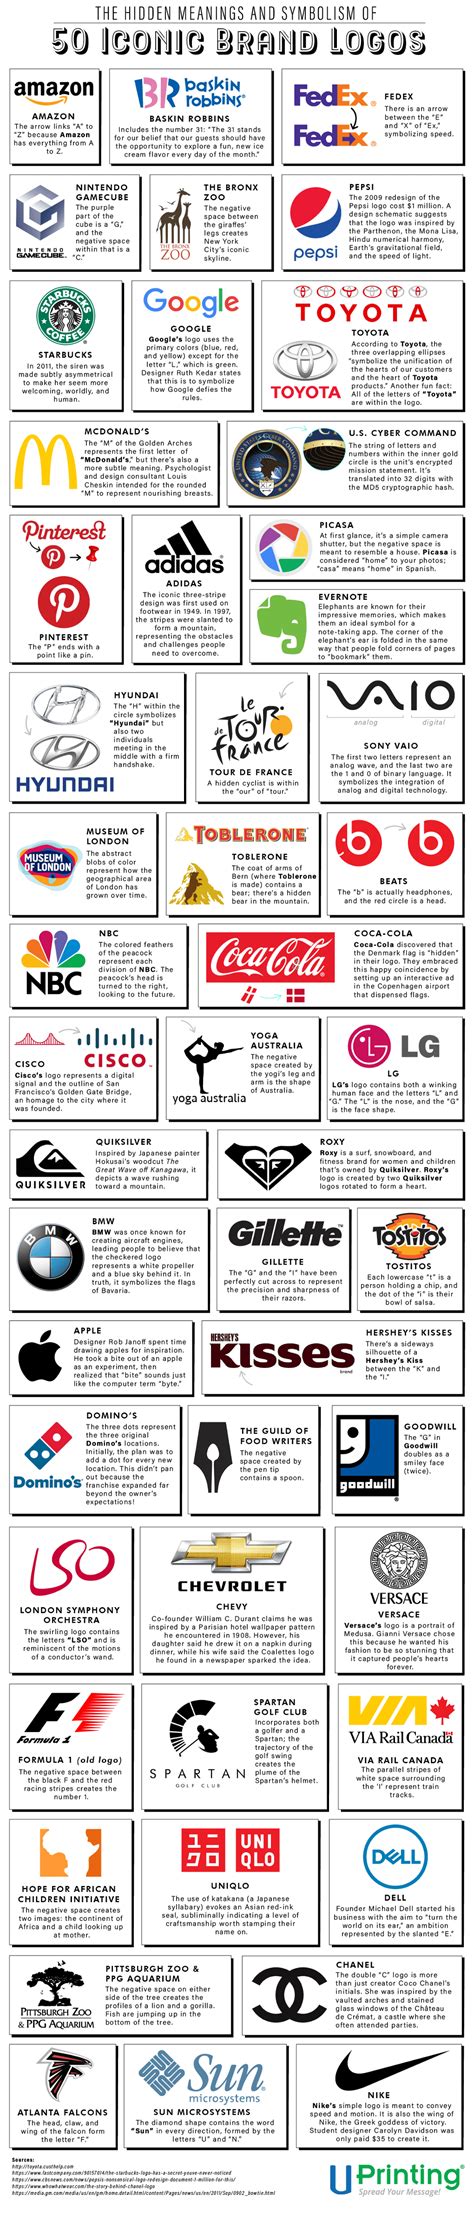 The Hidden Meanings And Symbolism Of 50 Iconic Brand Logos Custom